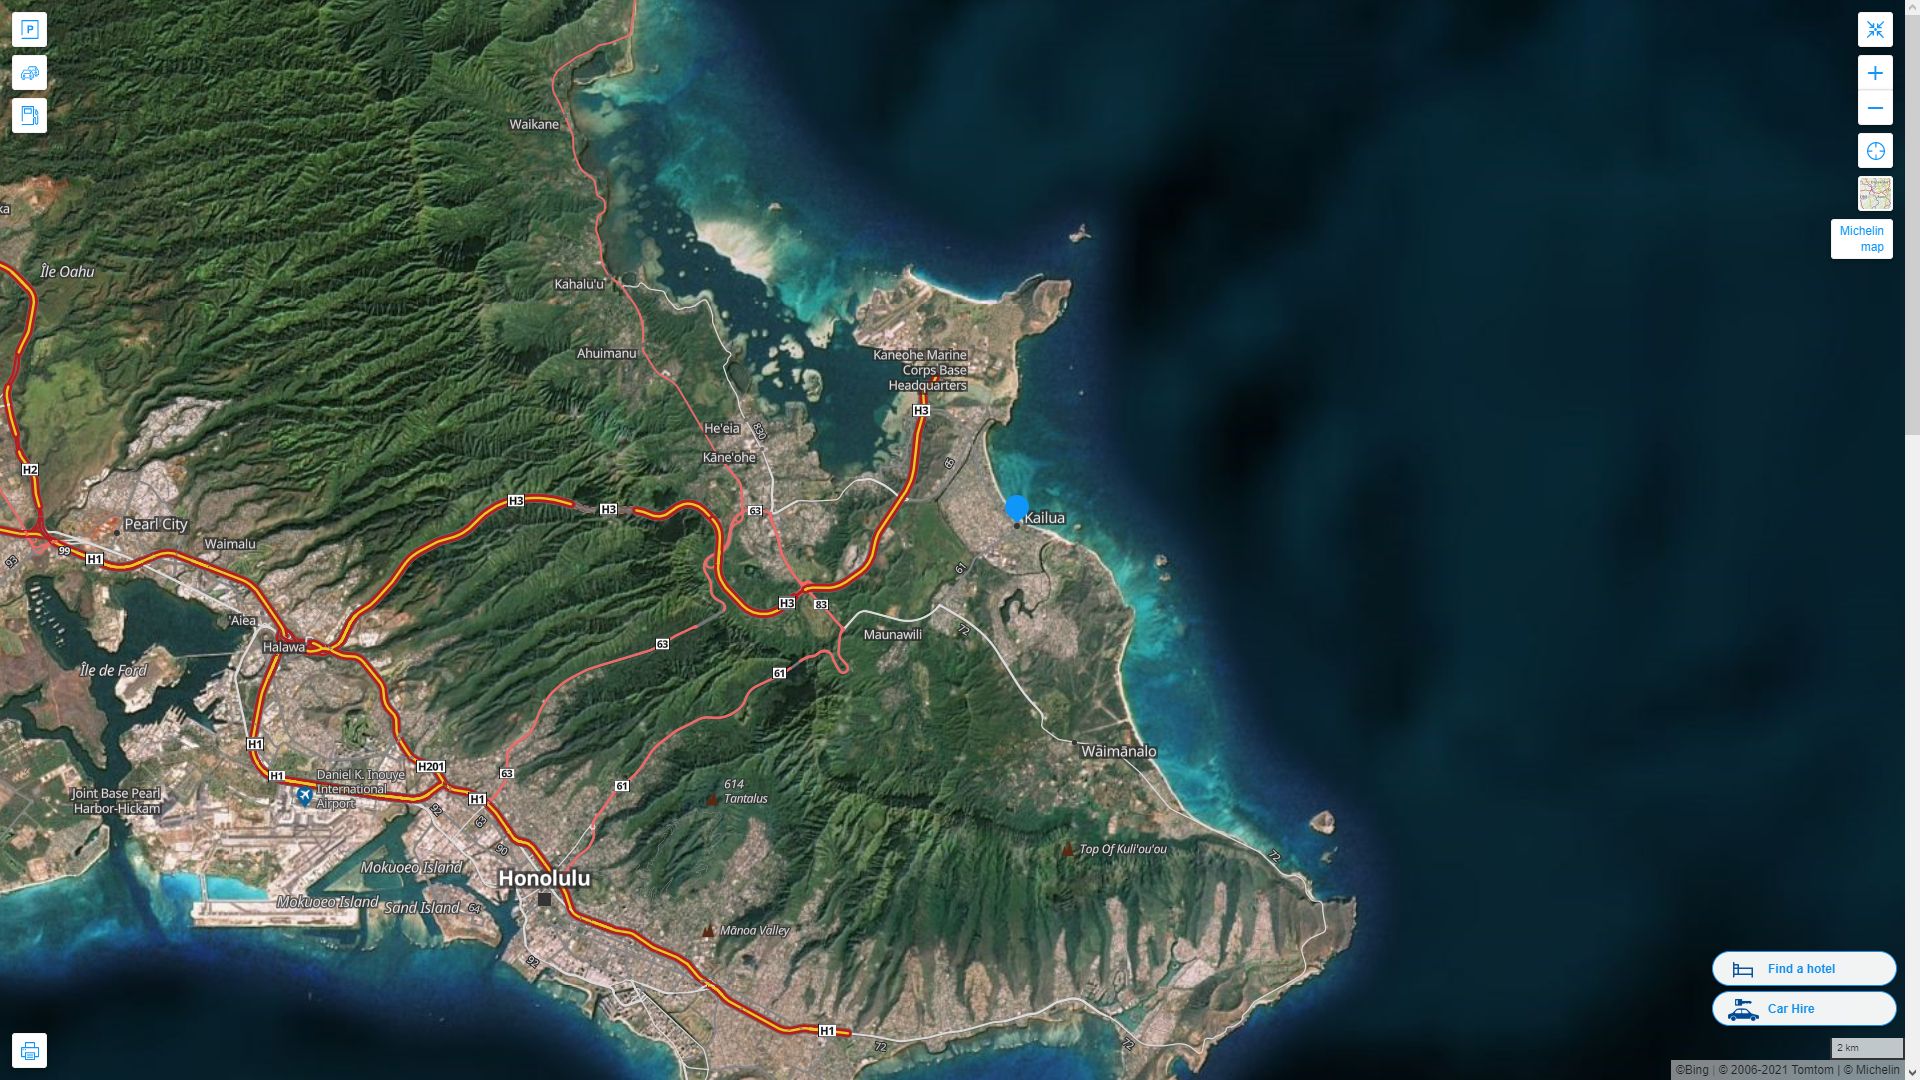 Kailua Hawaii Highway and Road Map with Satellite View